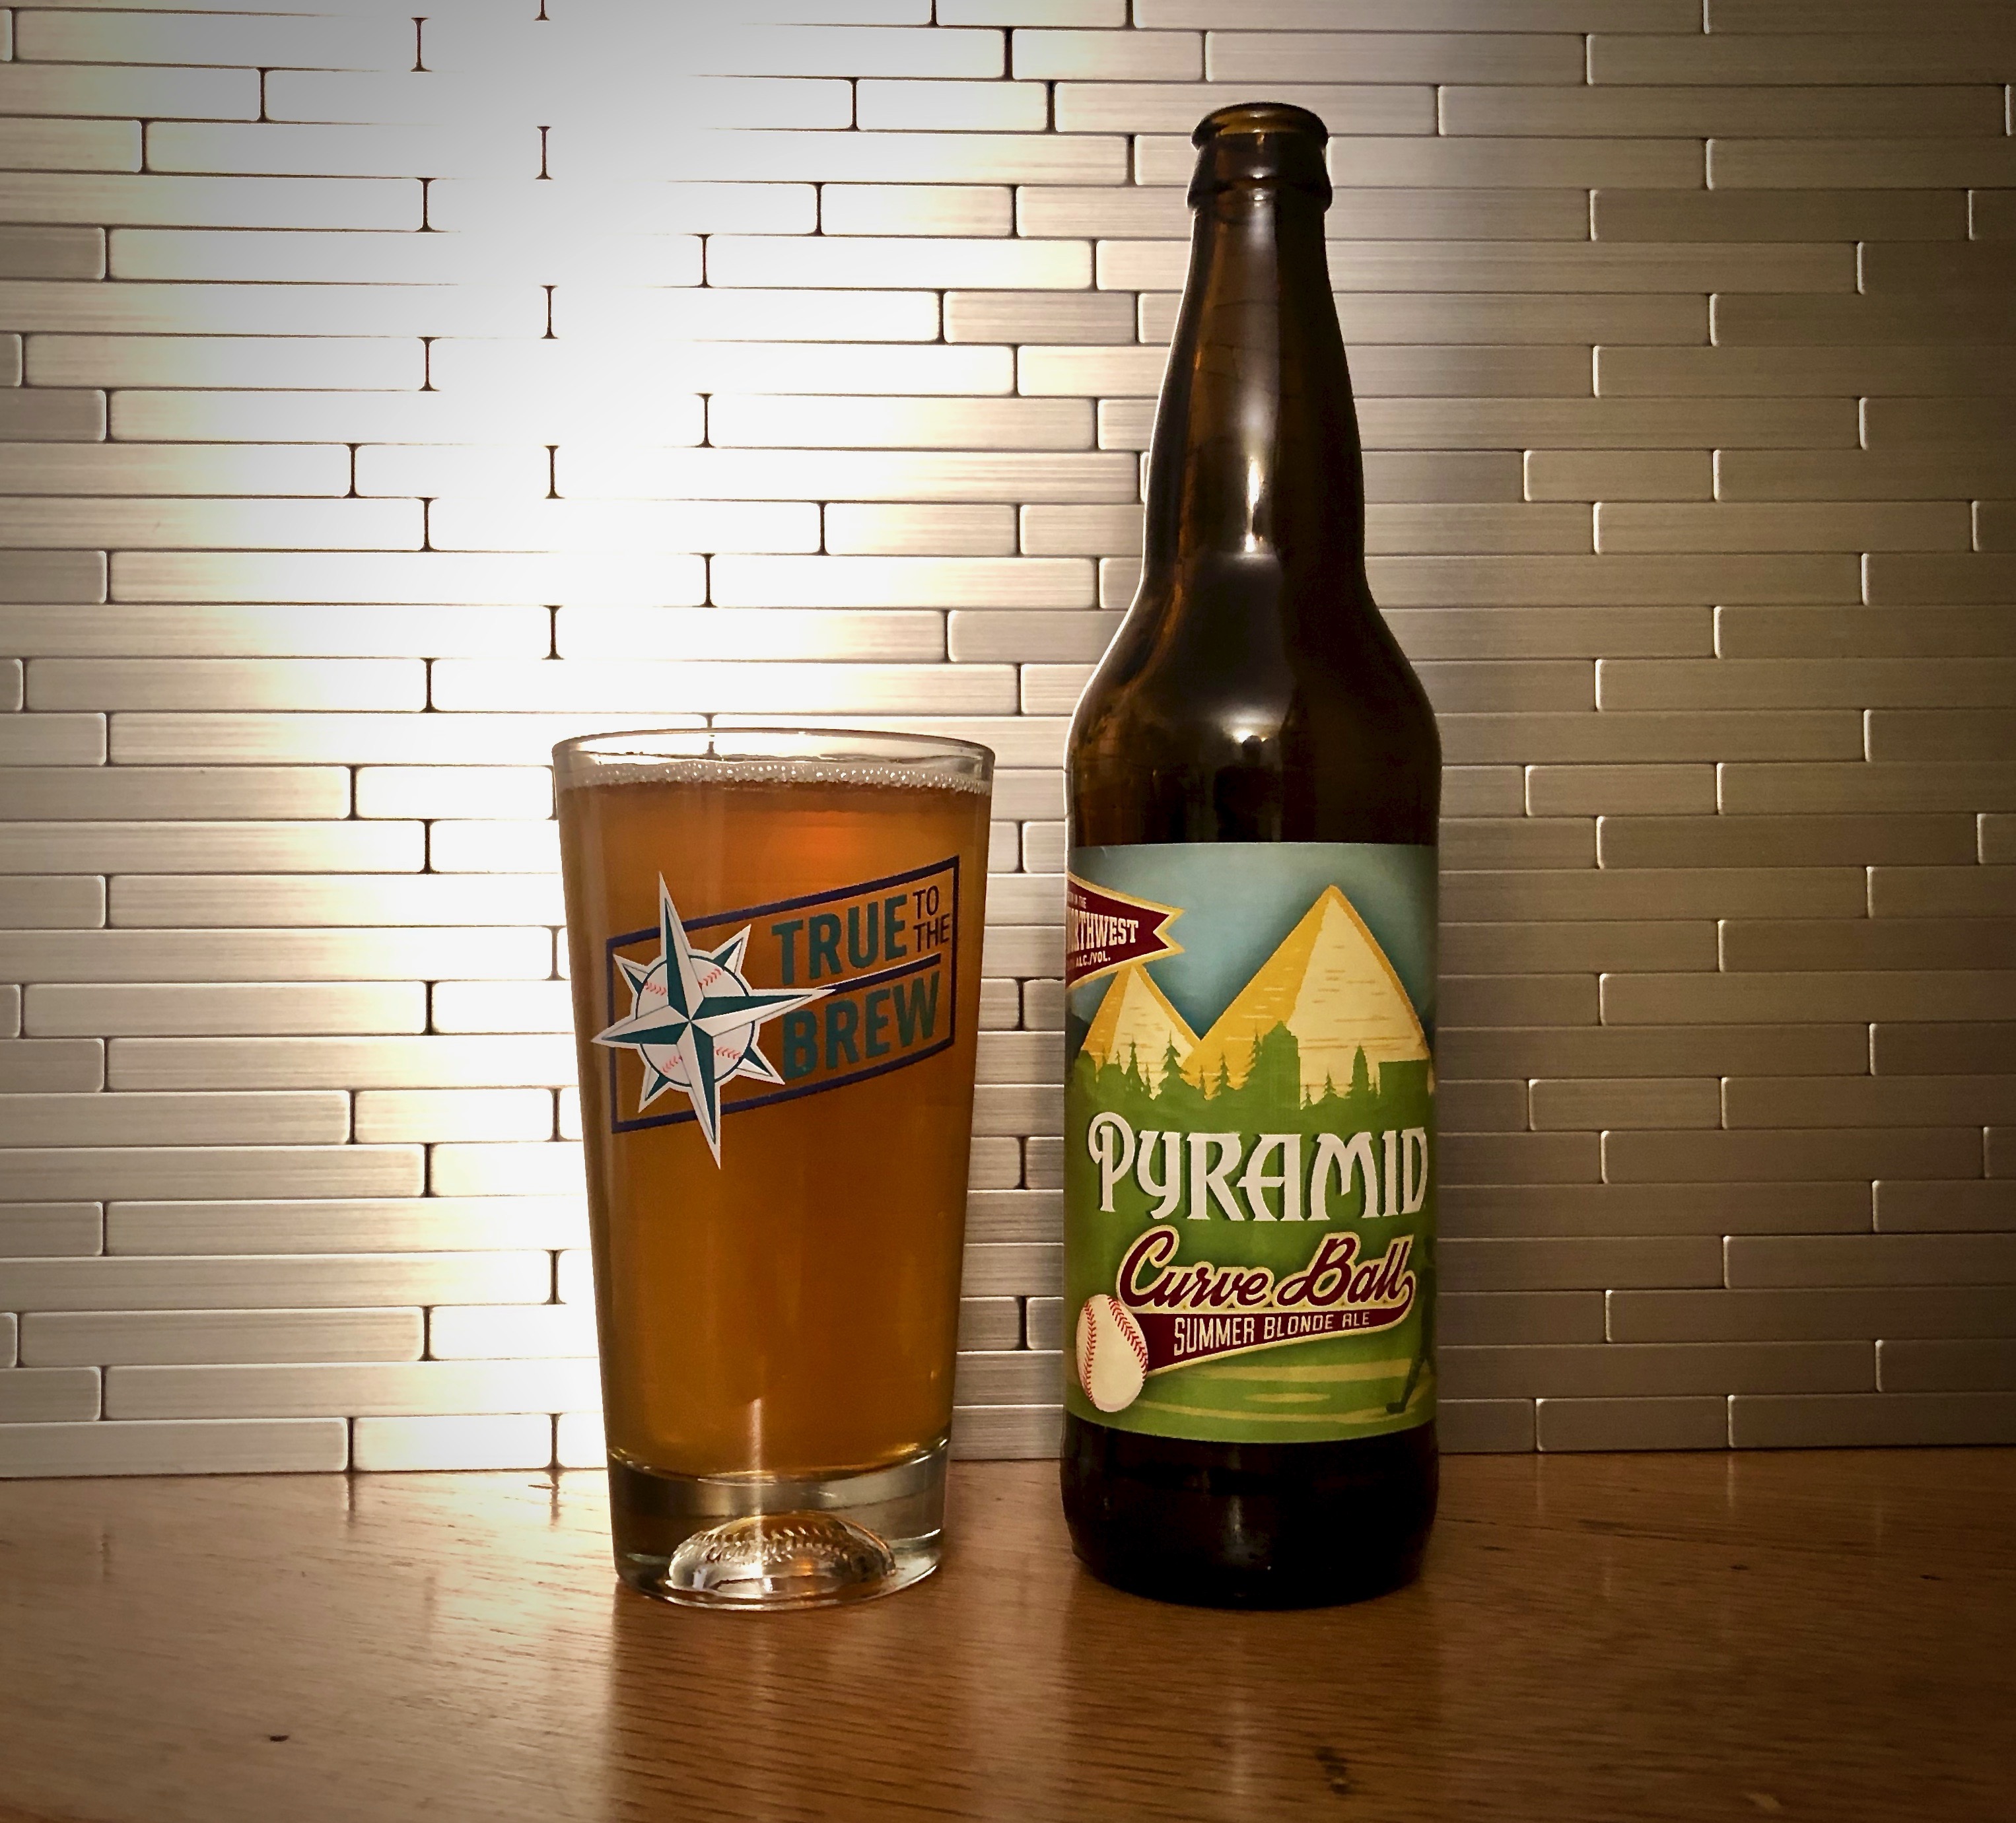 With the start of baseball season, Pyramid Brewing returns with its Curve Ball Summer Blonde Ale.